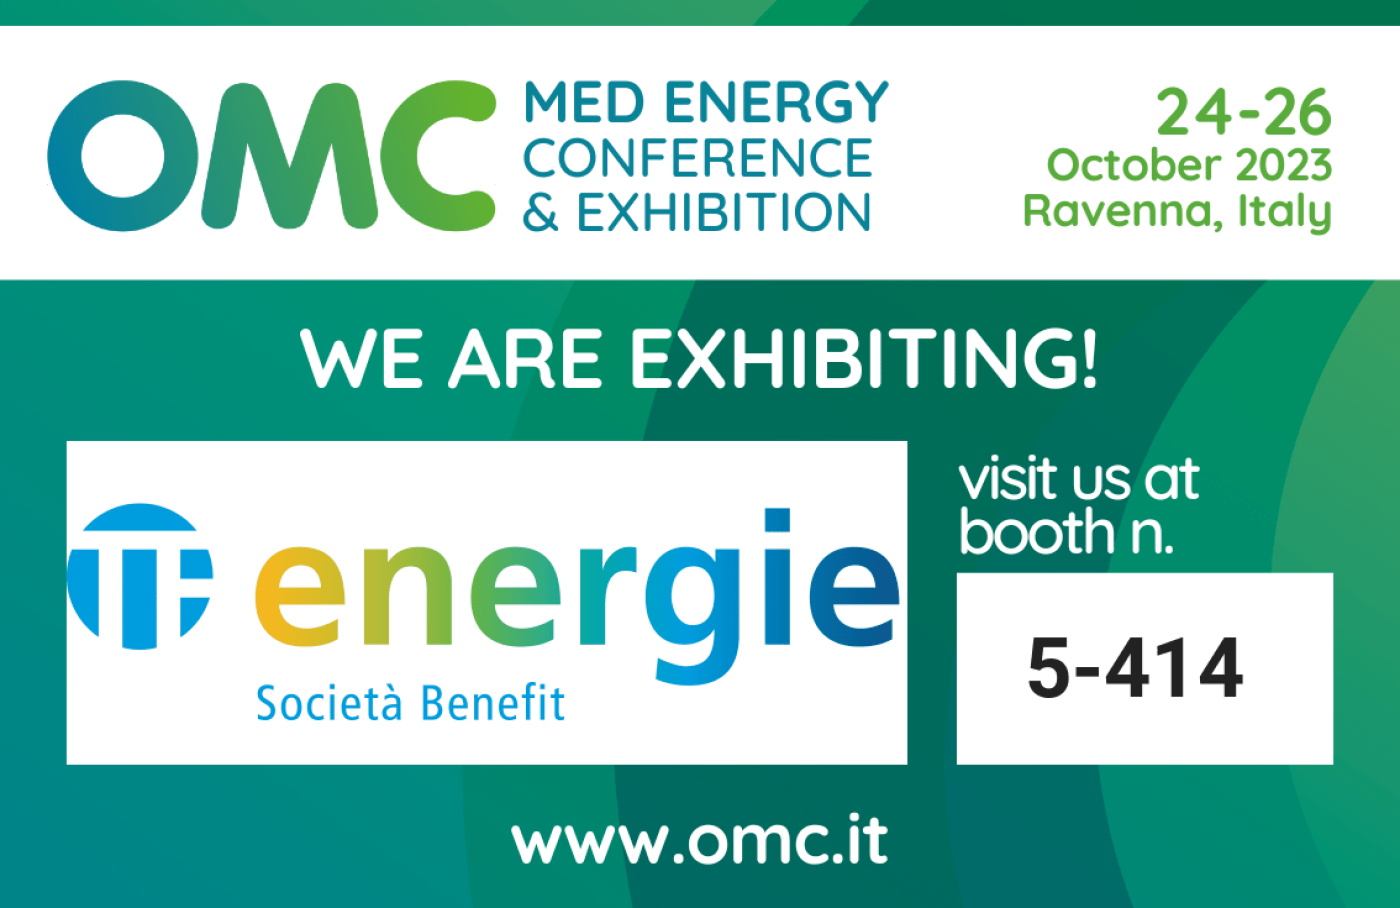 Energie Techfem at OMC Med Energy Conference & Exhibition 2023.